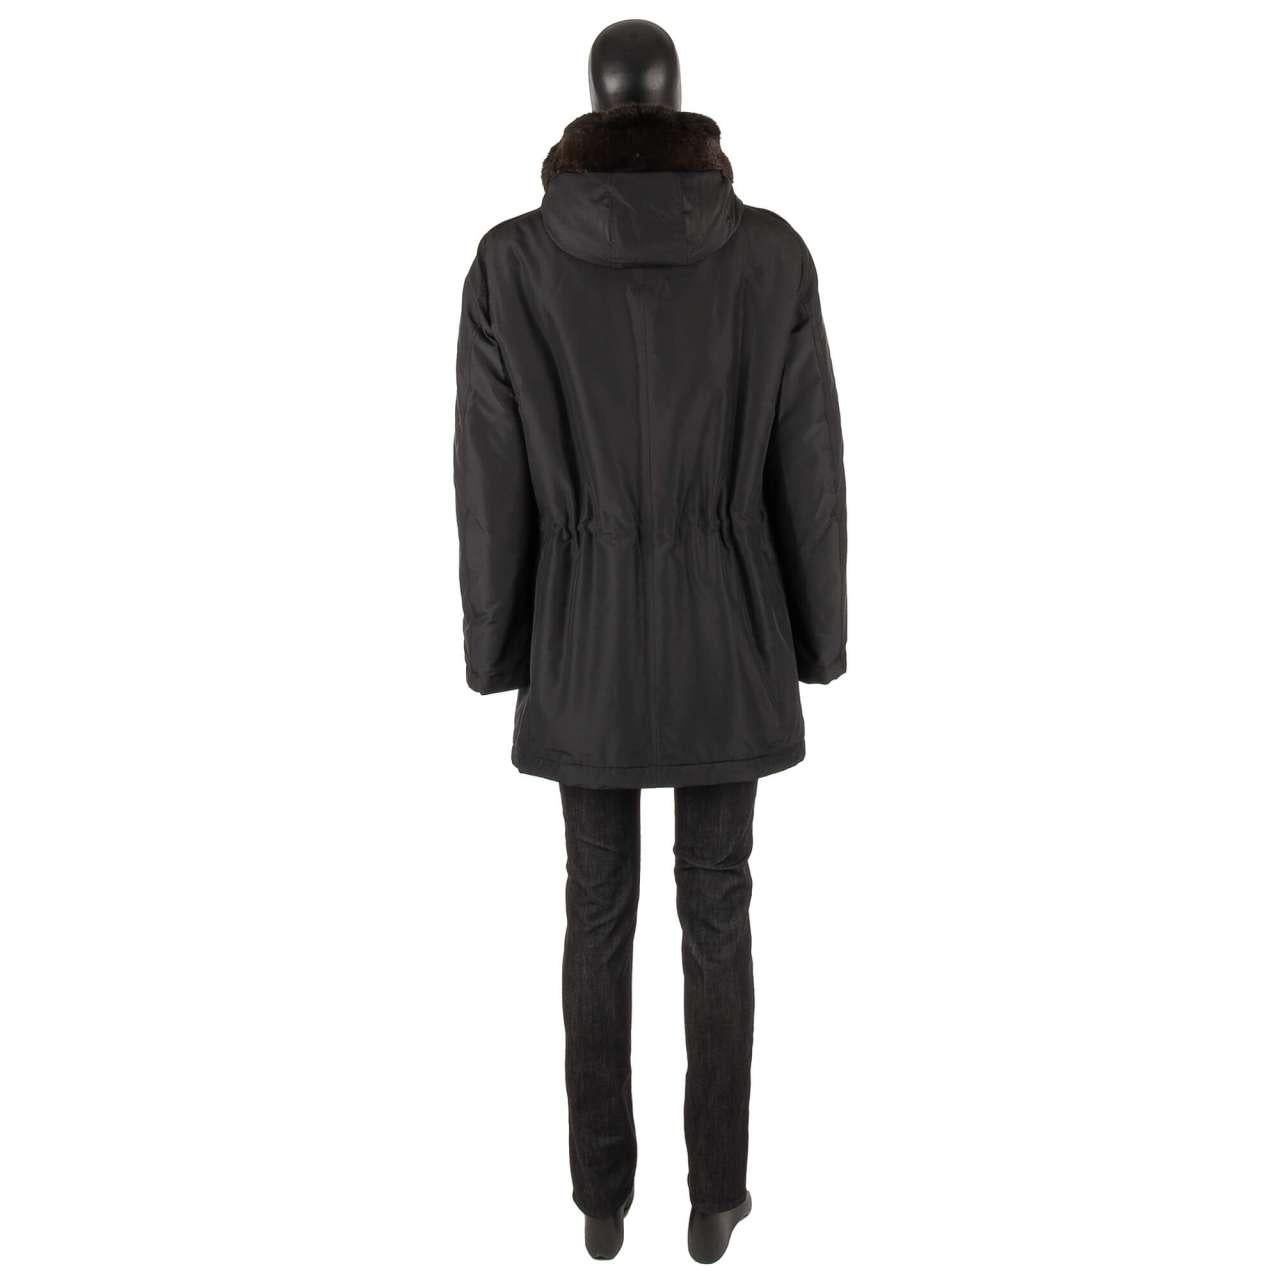 Dolce & Gabbana Silk Parka Jacket with Detachable Fur Lining and Hoody Black 48 For Sale 4